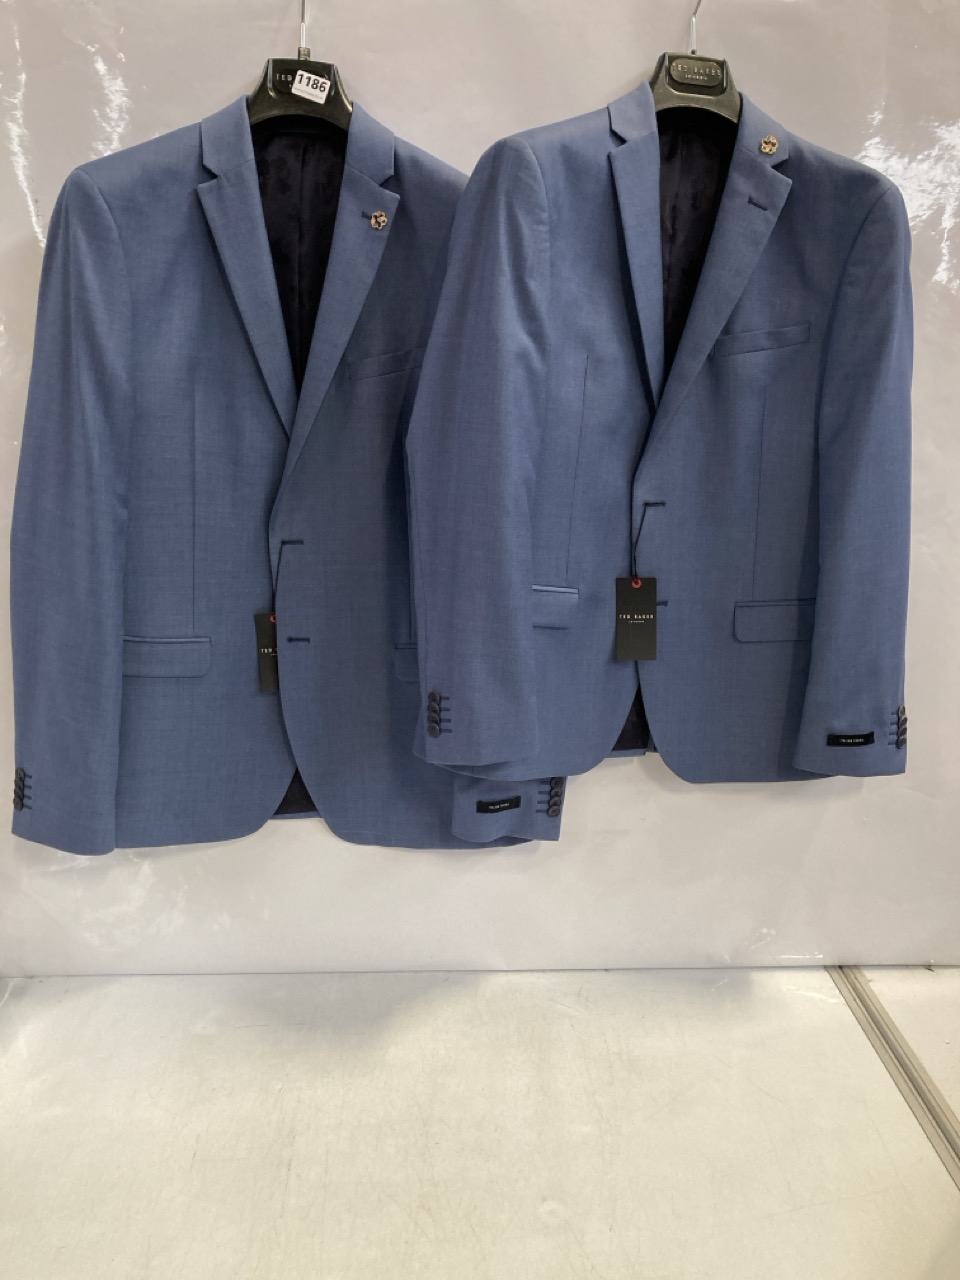 4 X MEN'S SUIT JACKETS TO INCLUDE TED BAKER DORSET SMOKE BLUE JACKET SIZE 44